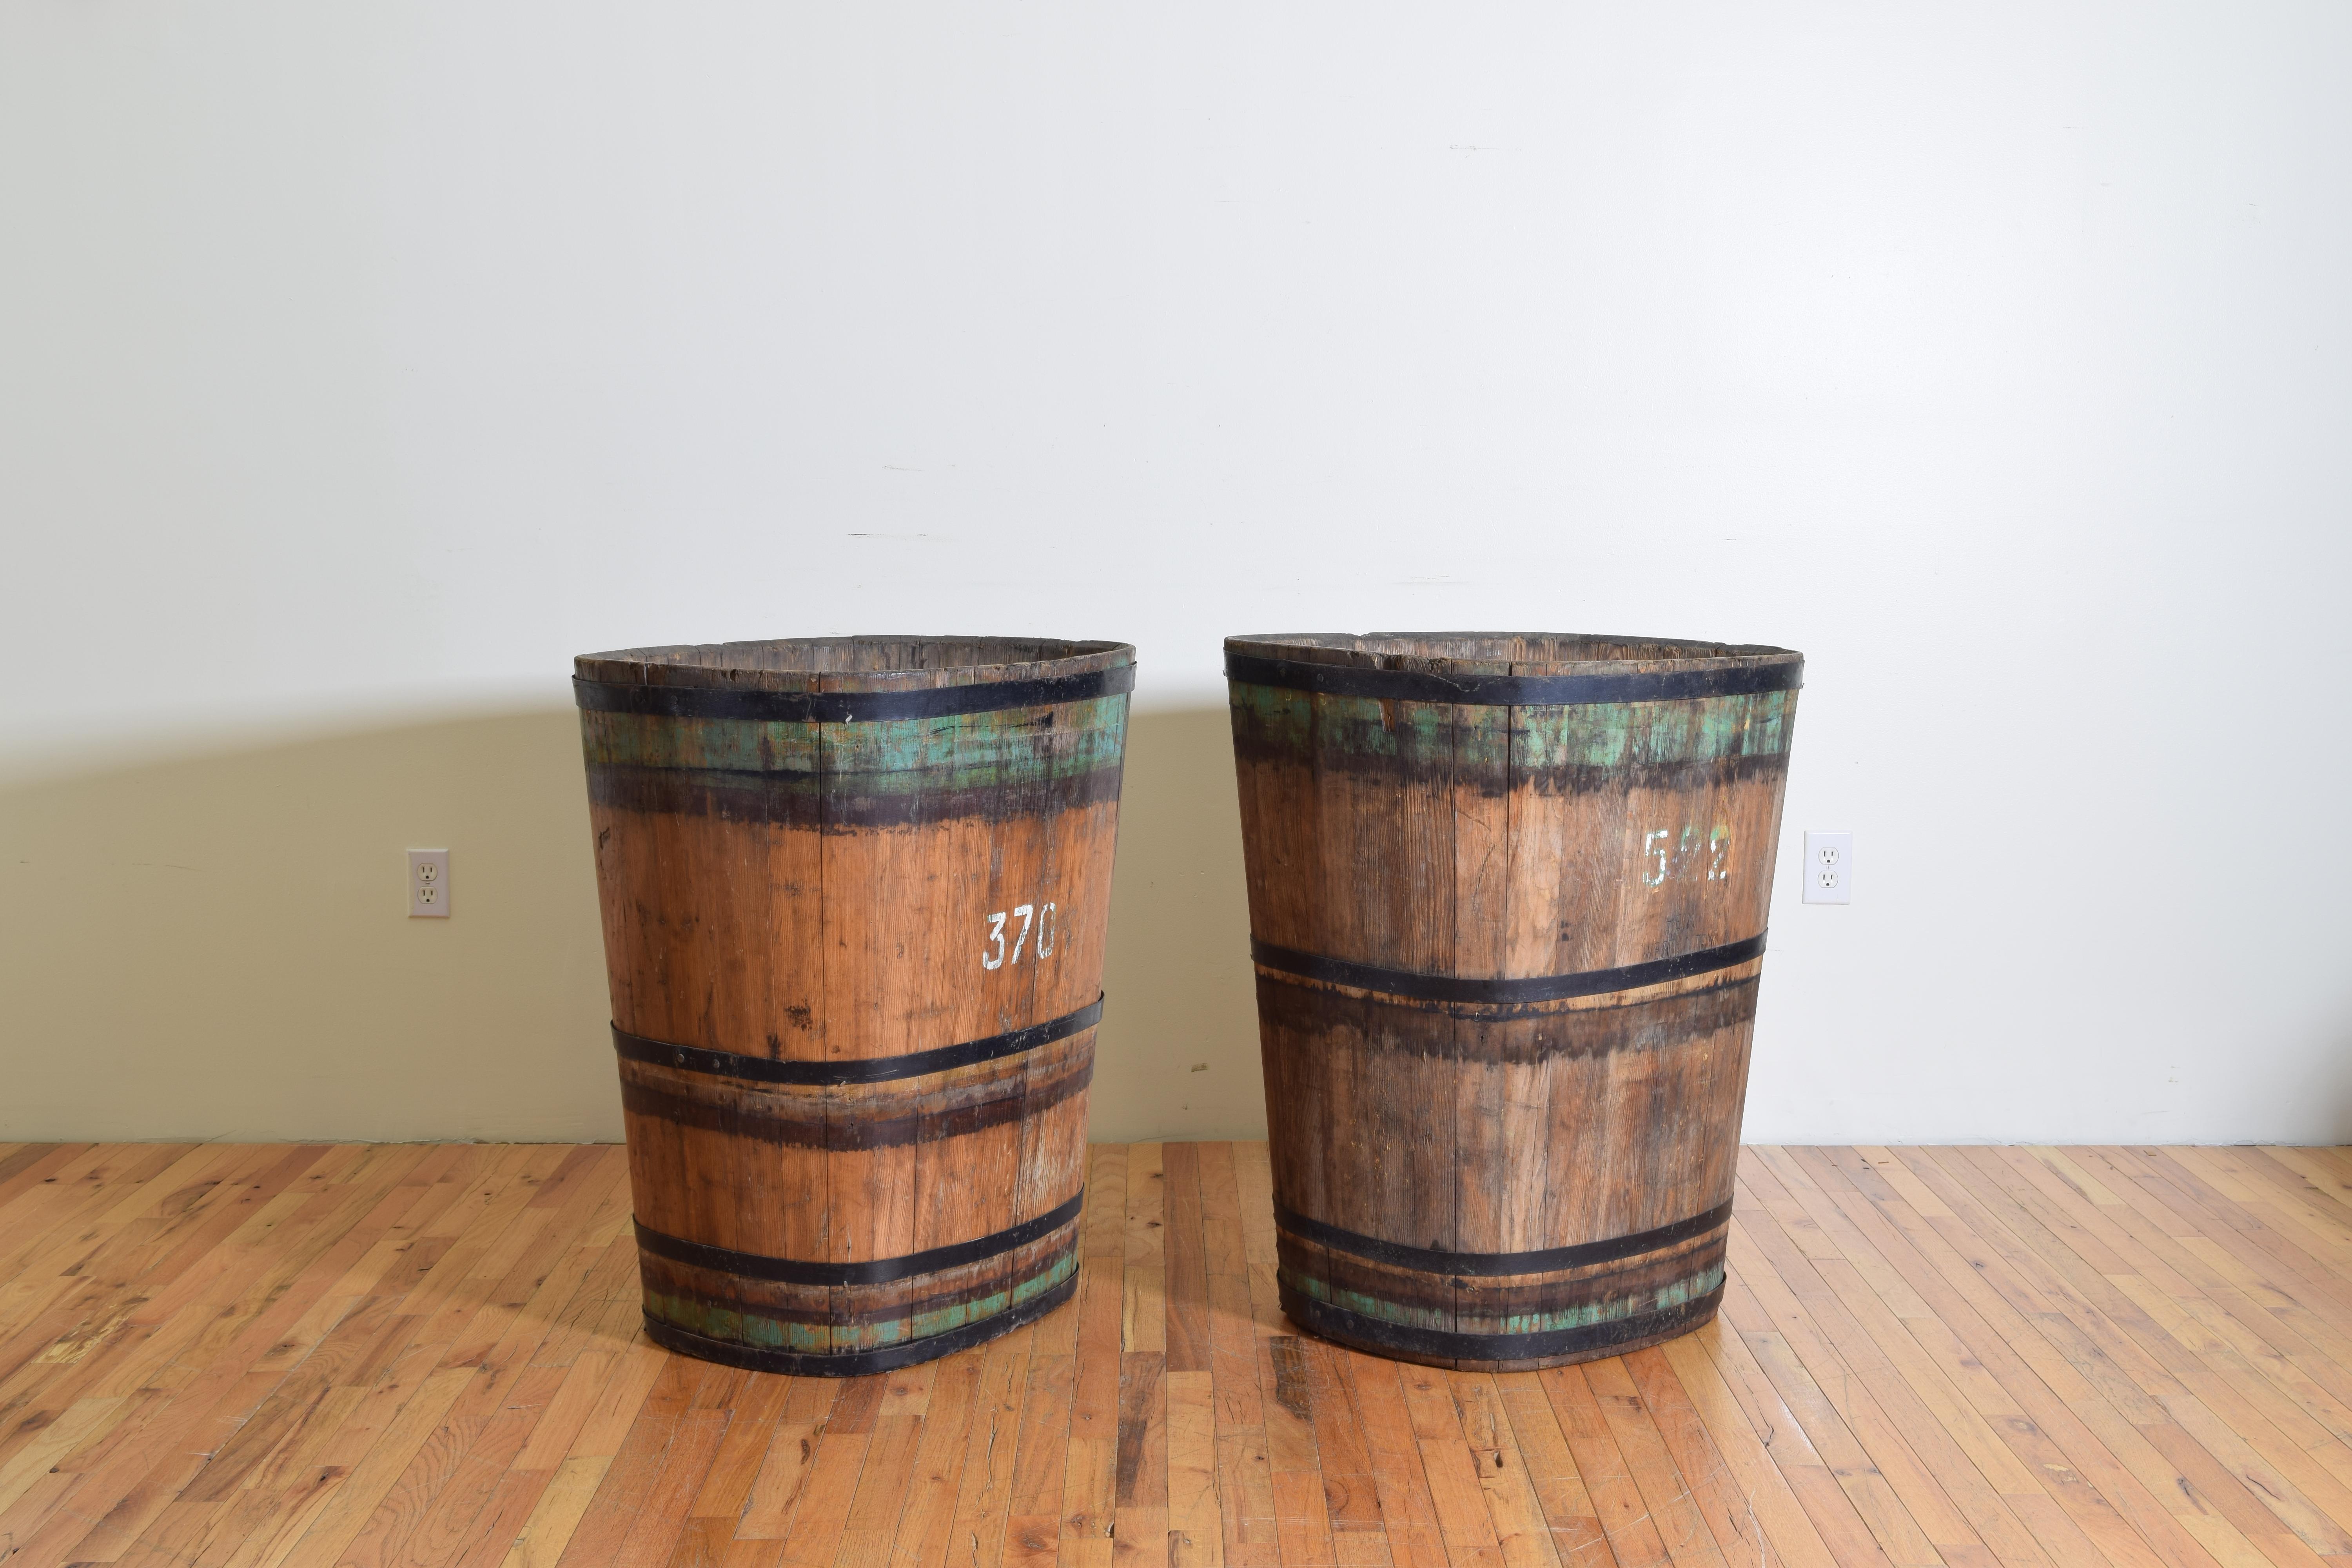 the buckets are made of multiple planks of wood bound by iron straps, retaining original paint and numbers, stenciled 